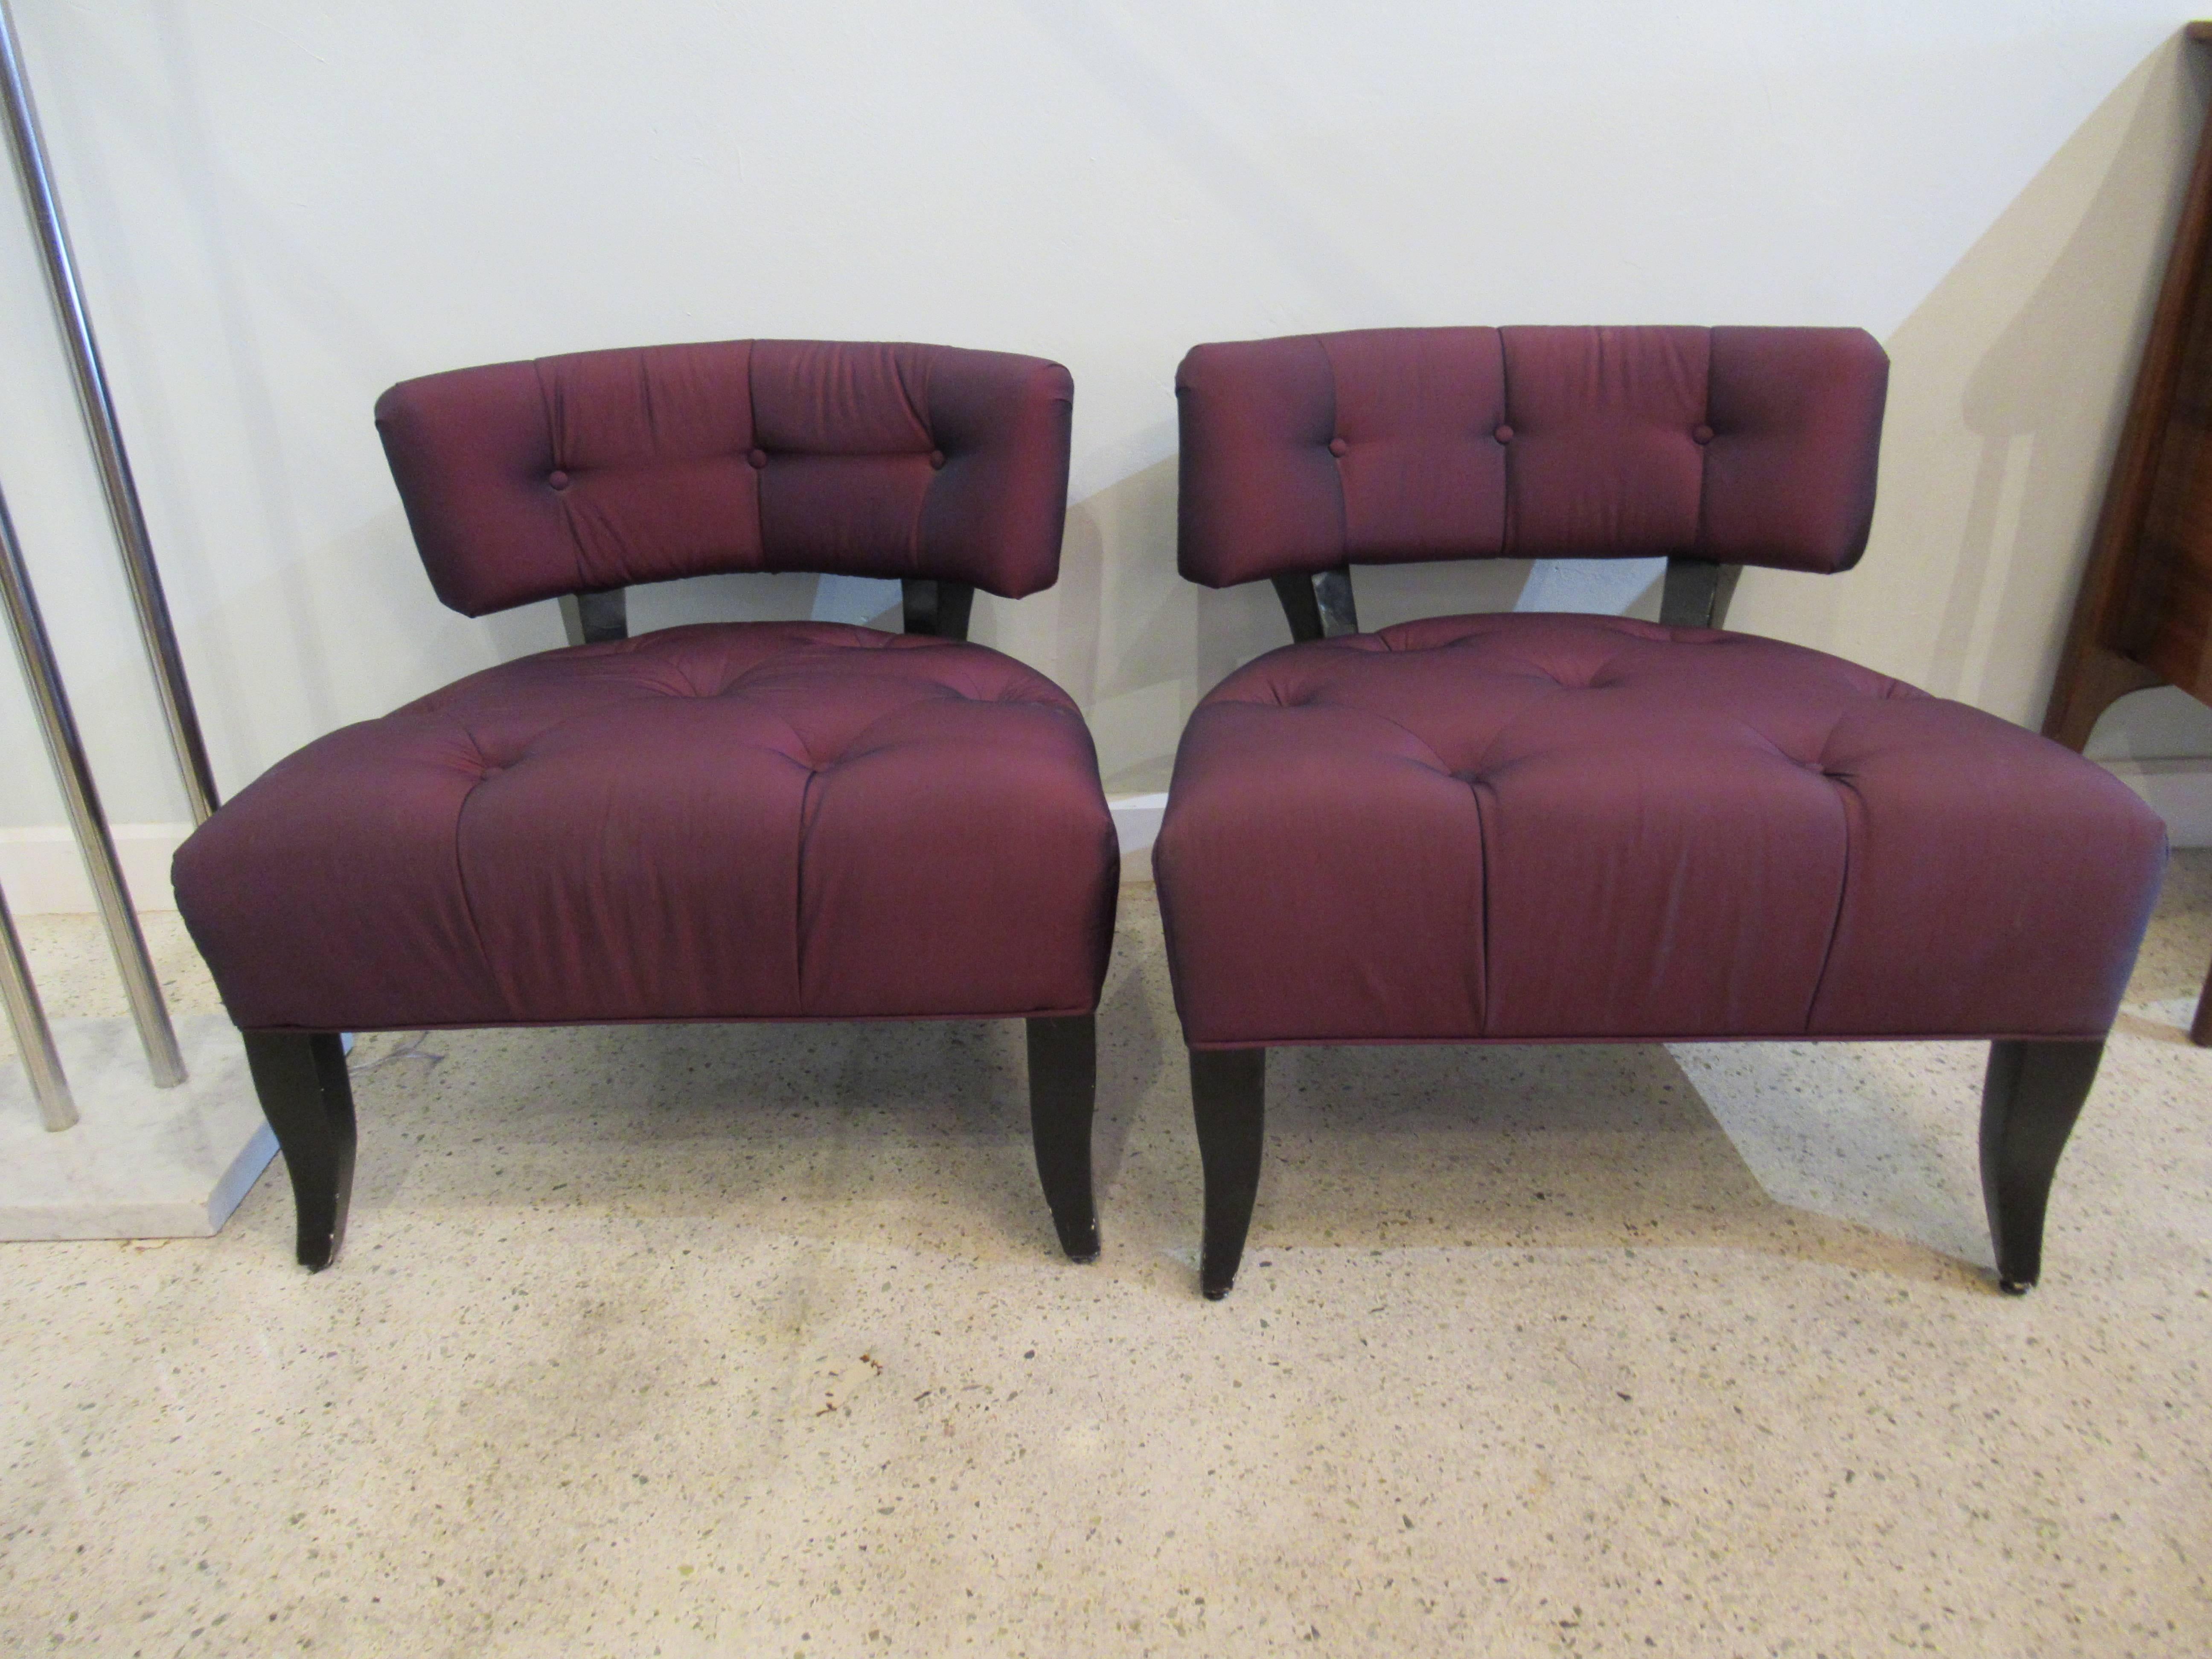 Pair of American Modern Klismos Slipper Chairs and Ottoman, Billy Haines, 1950s In Excellent Condition For Sale In Hollywood, FL